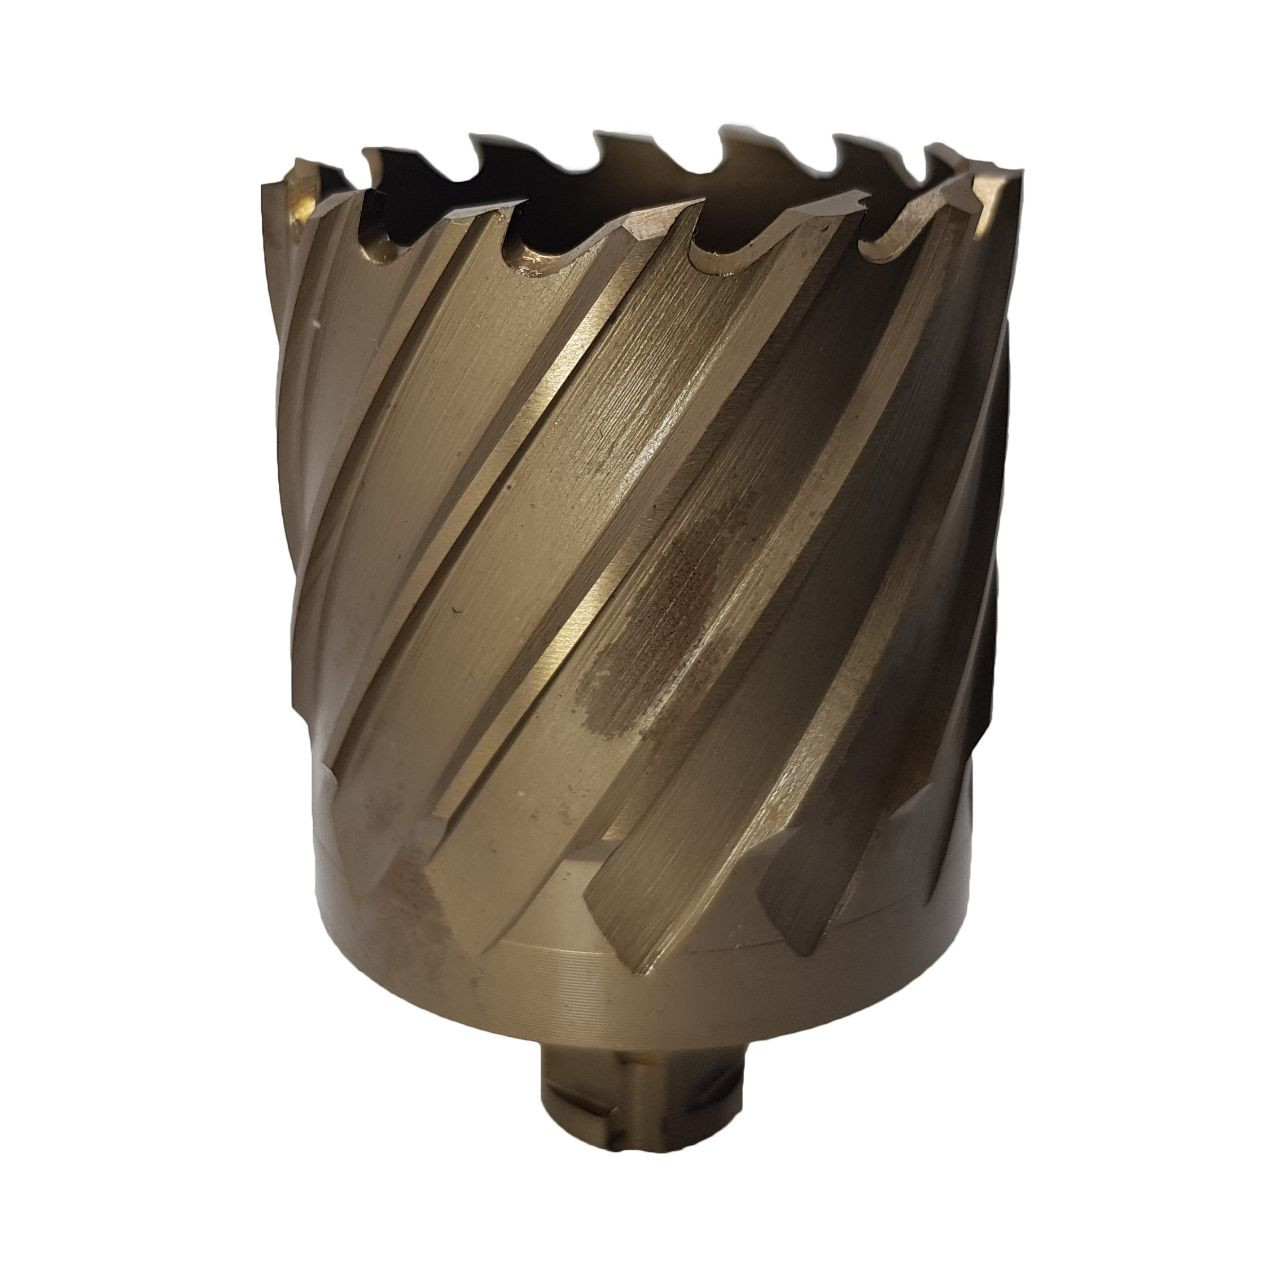 58 X 50 HSS-Co Excision Core Drill